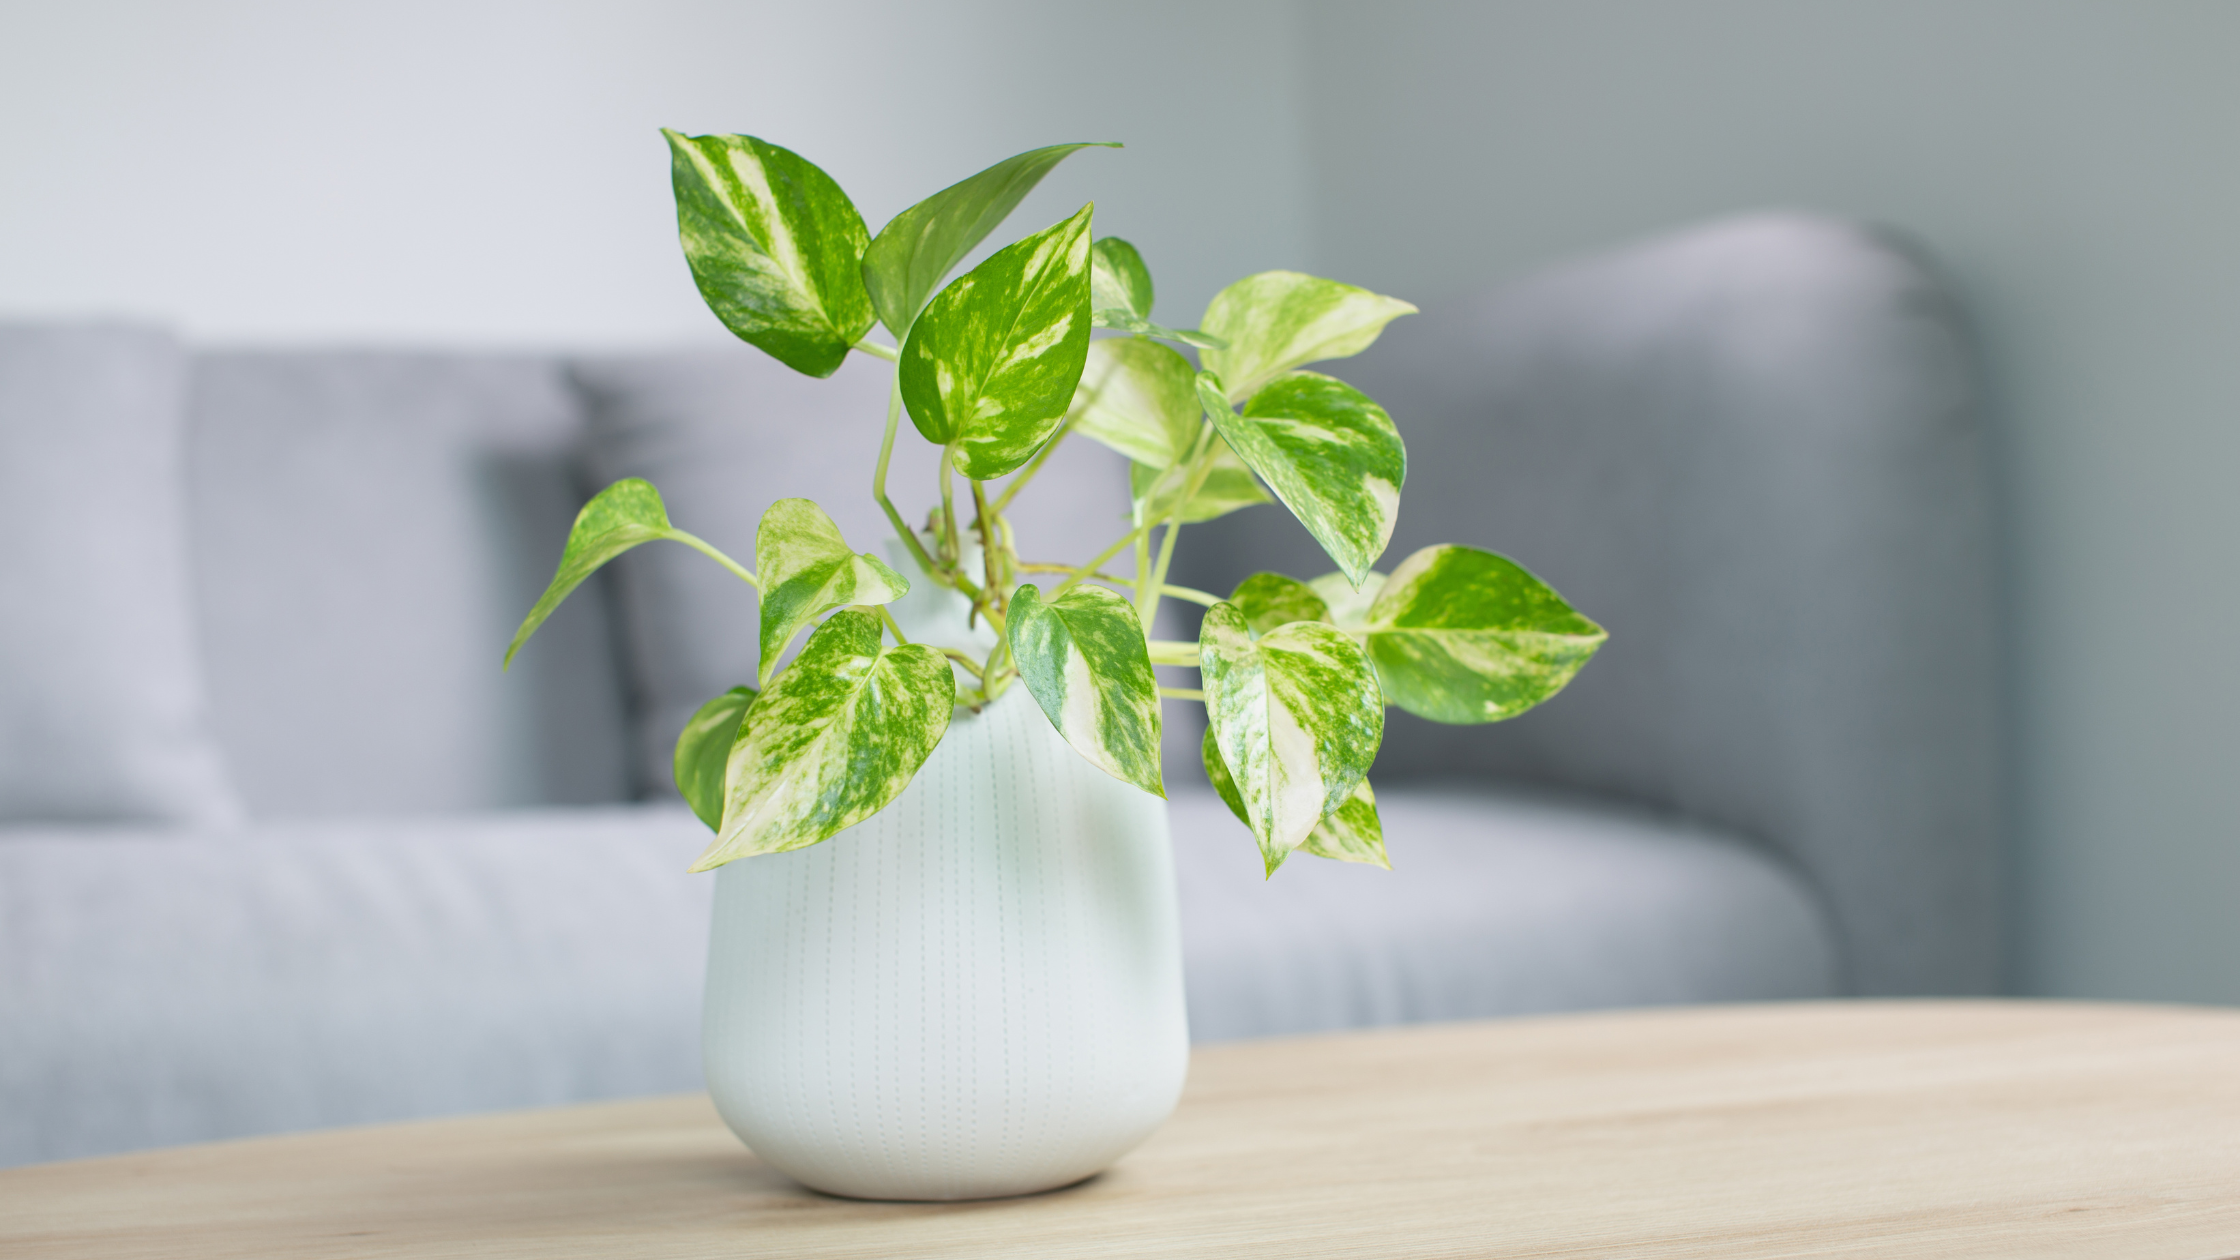 Indoor Plants & Pots: A Way To Add Life To Your Home Decor - Leaf Culture